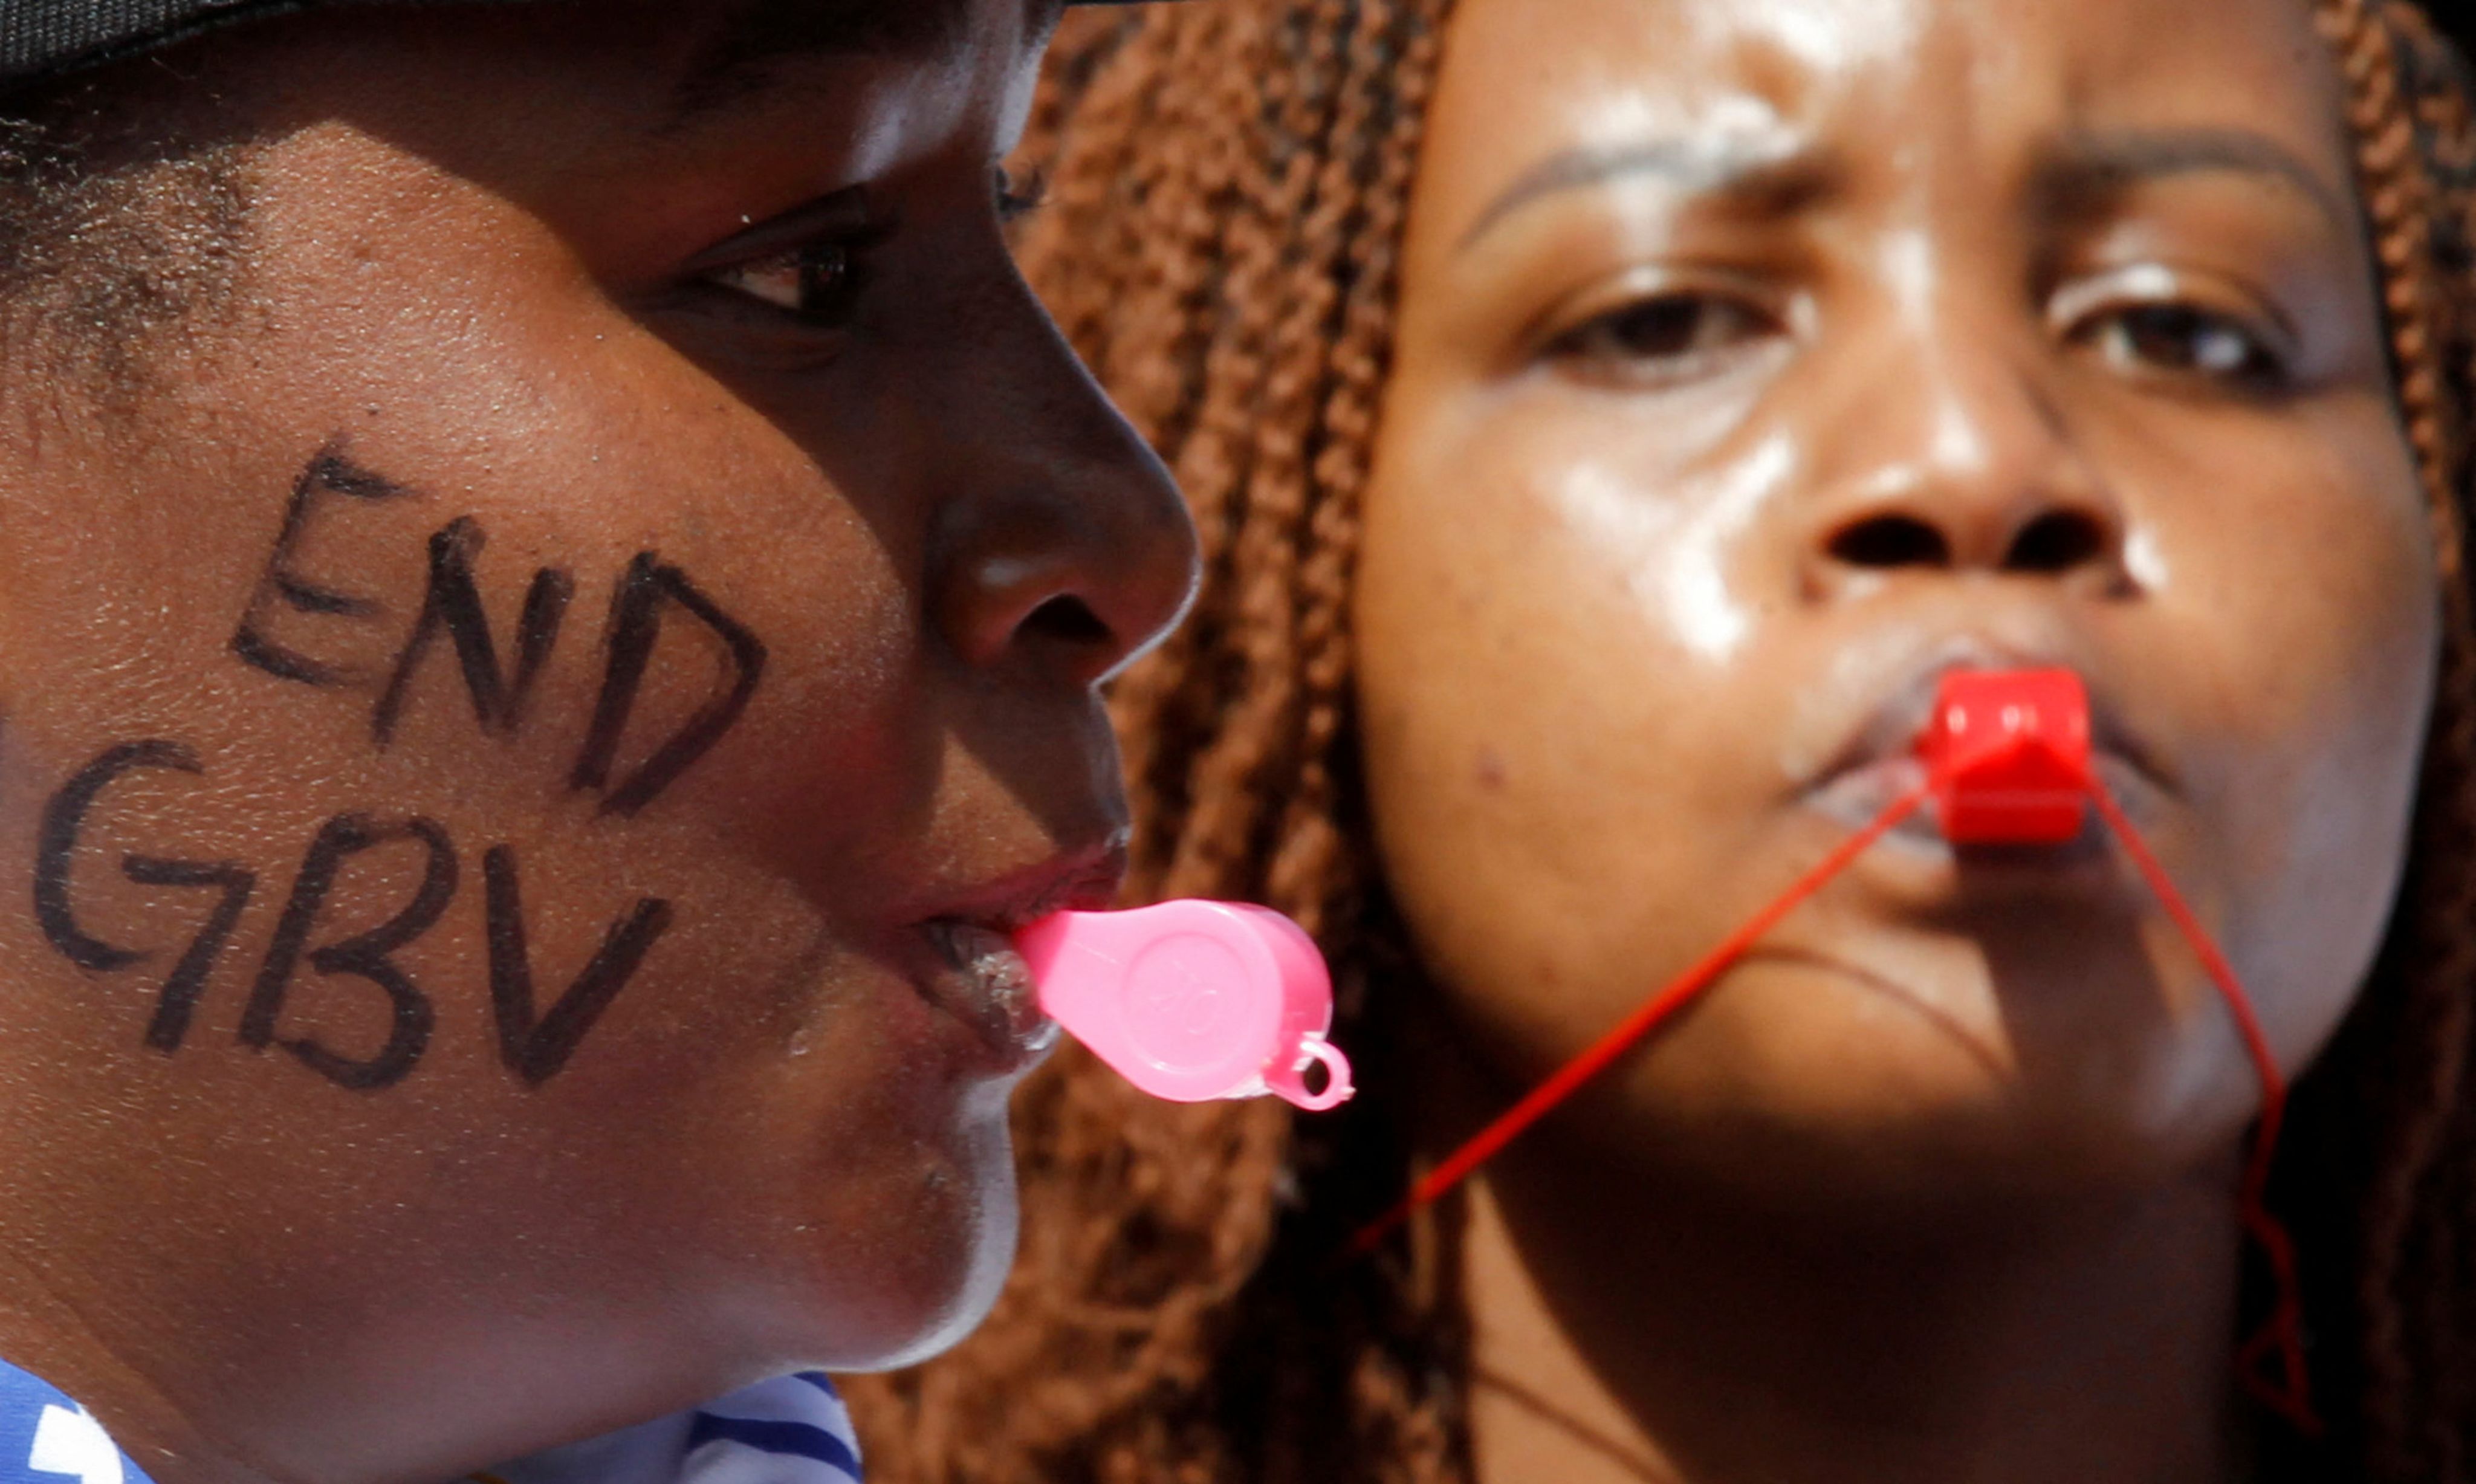 Women and civil society activists blow whistles as they demonstrate against gender-based violence.